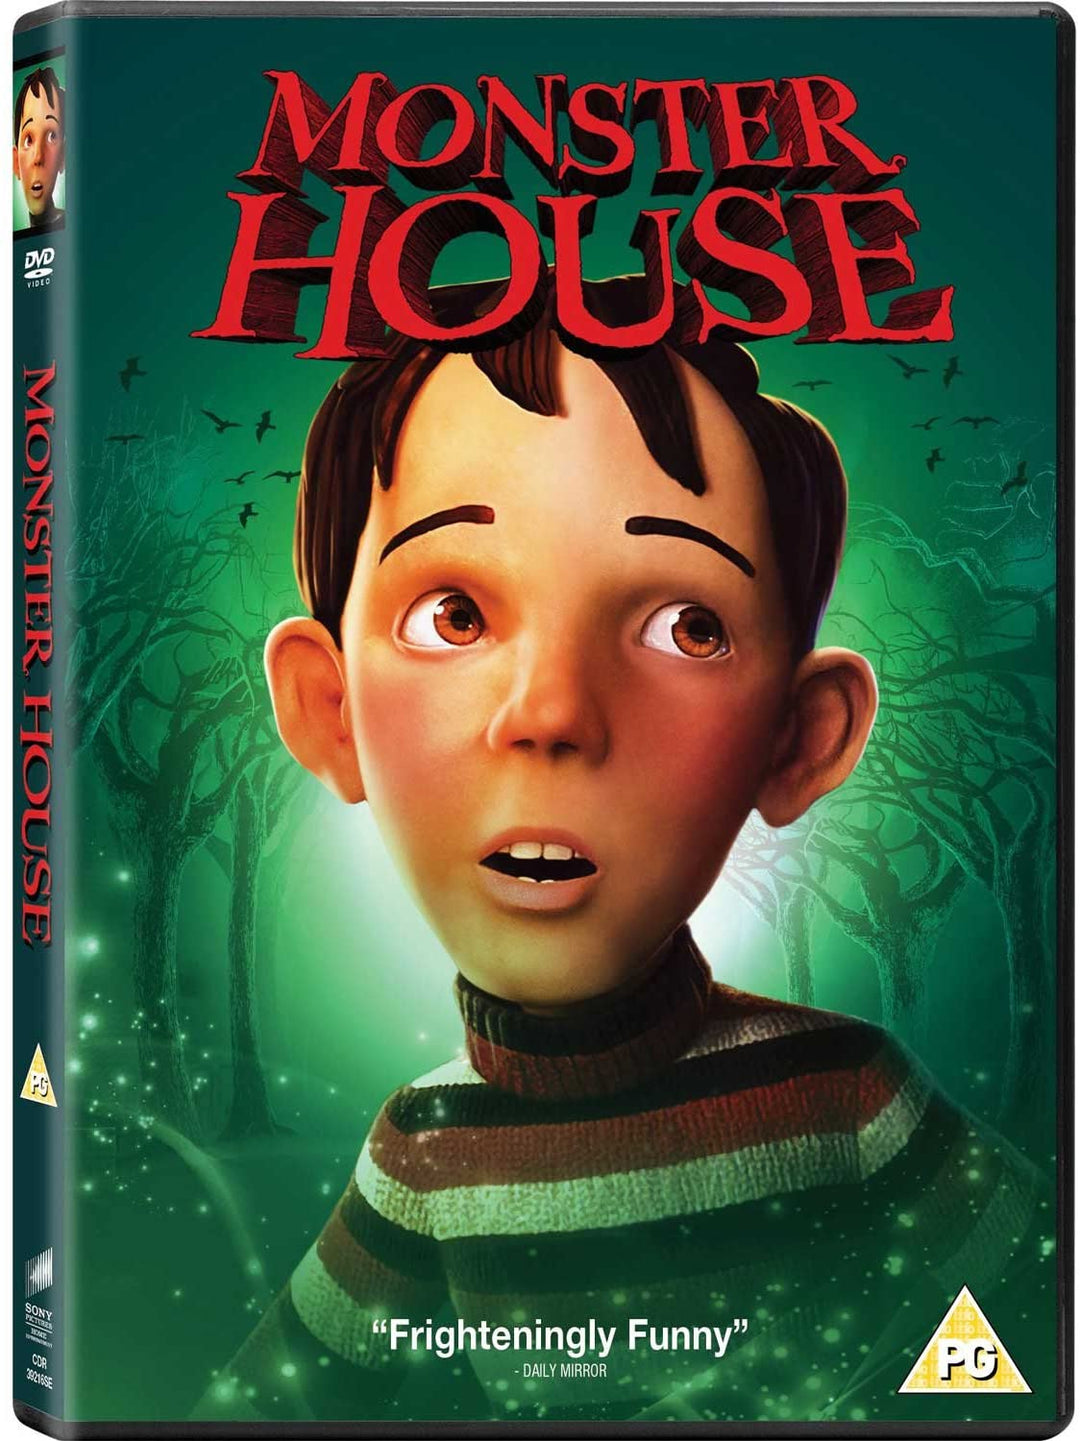 Monster House [2017] - Animation/Comedy [DVD]